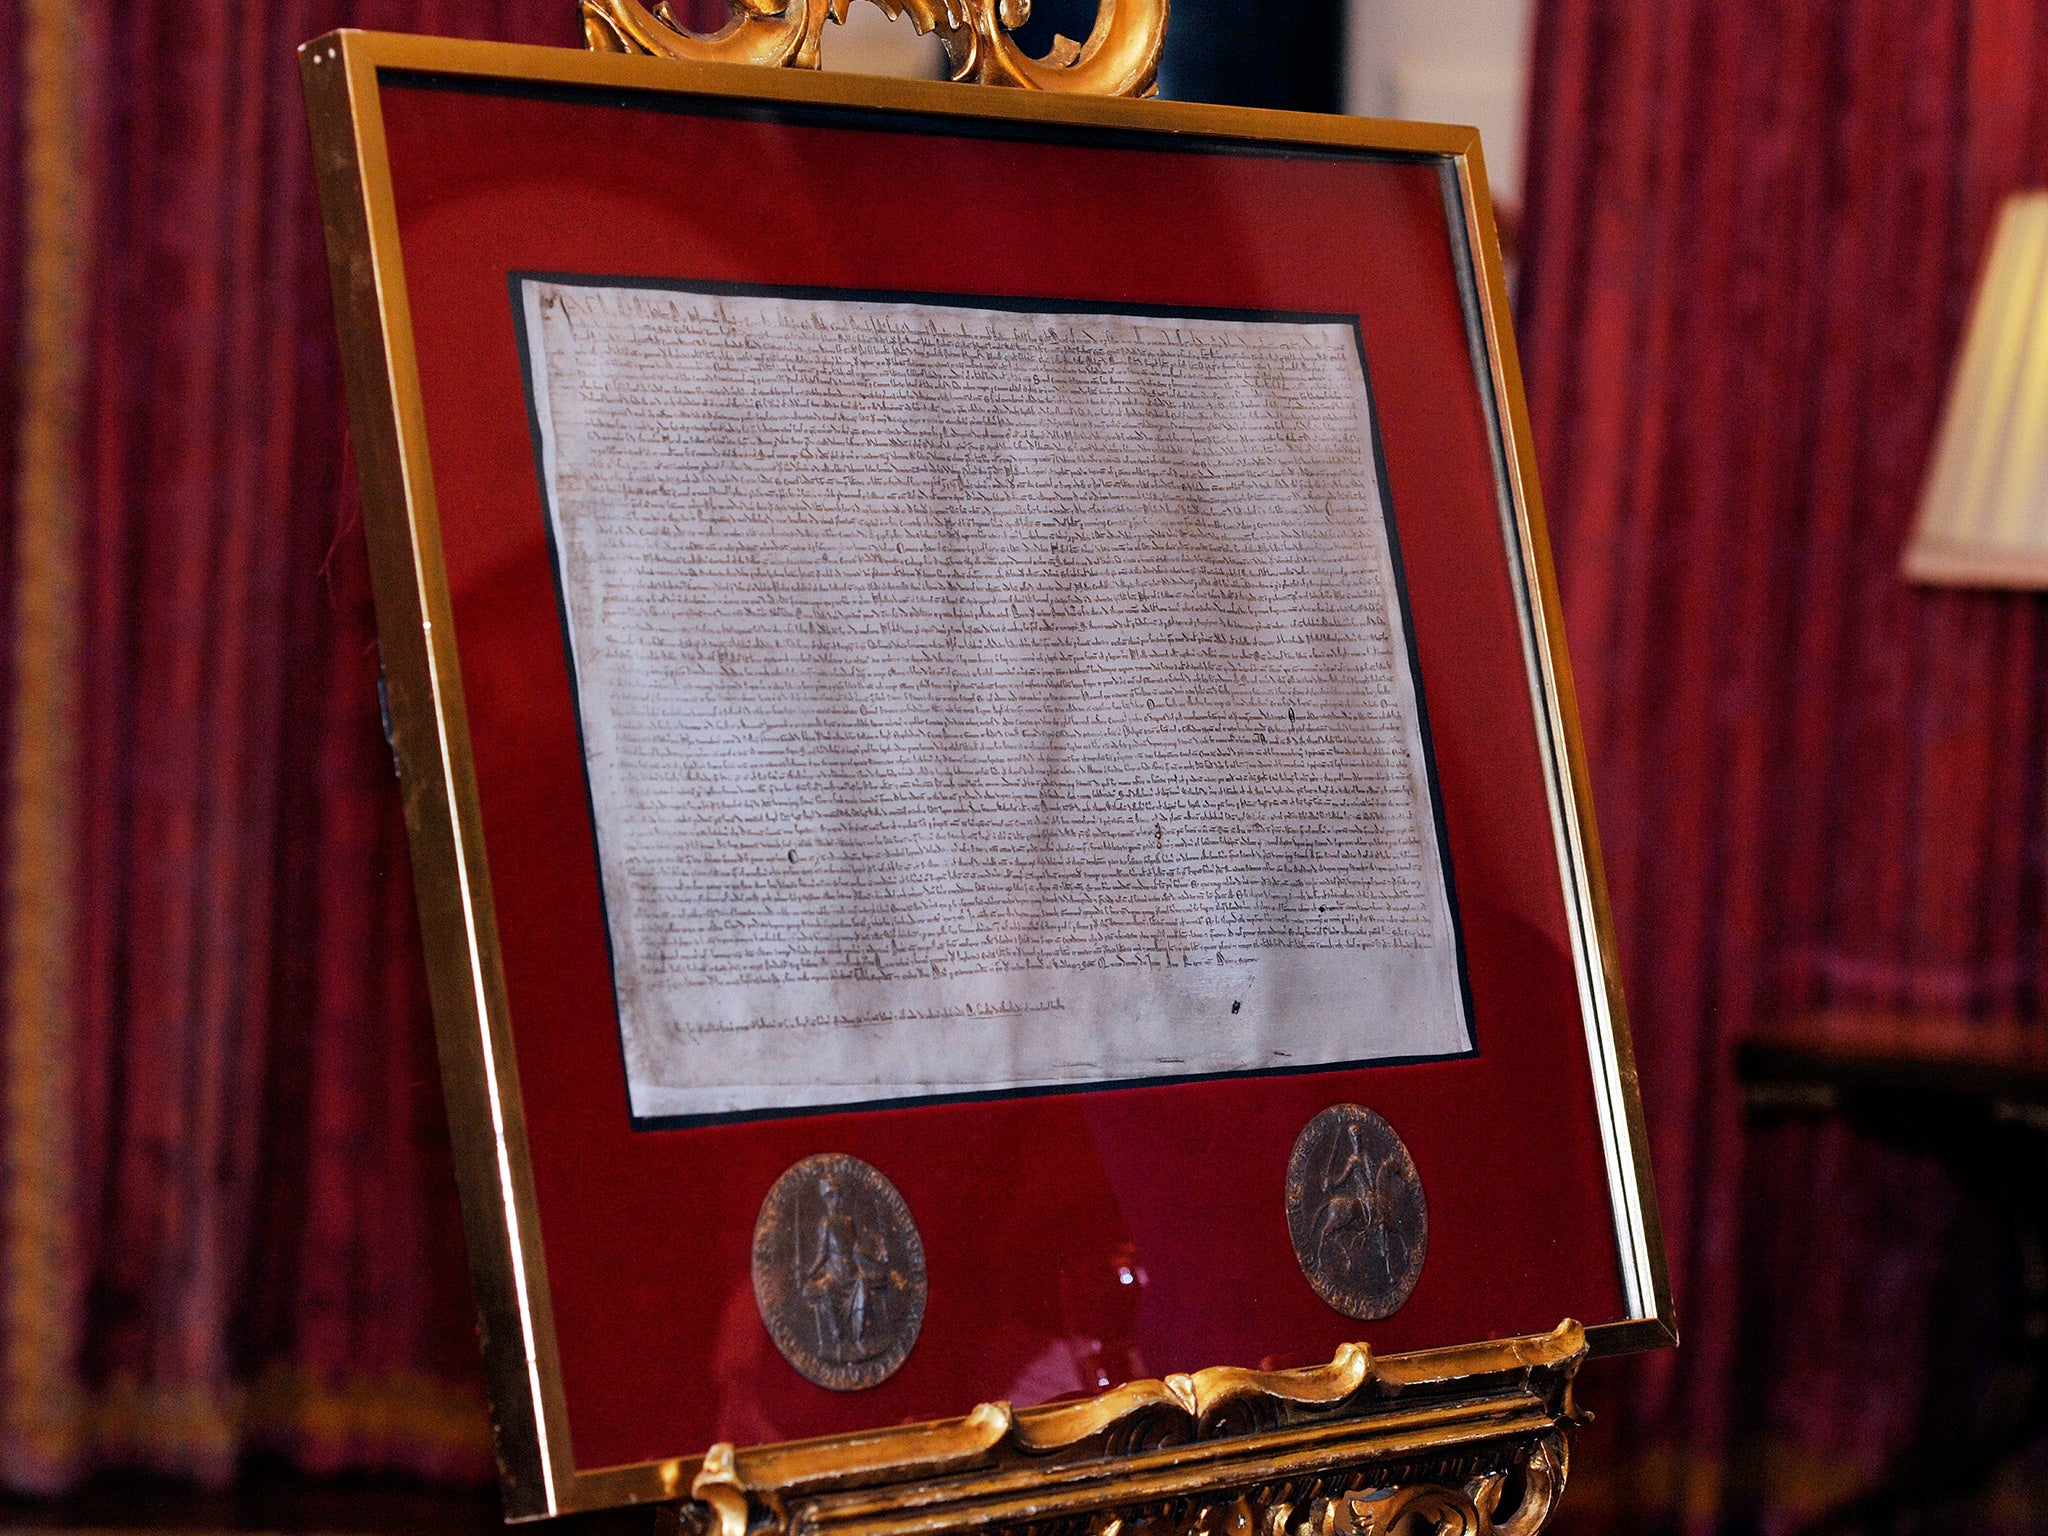 The revelations have been described as having 'important historical implications' for the Magna Carta